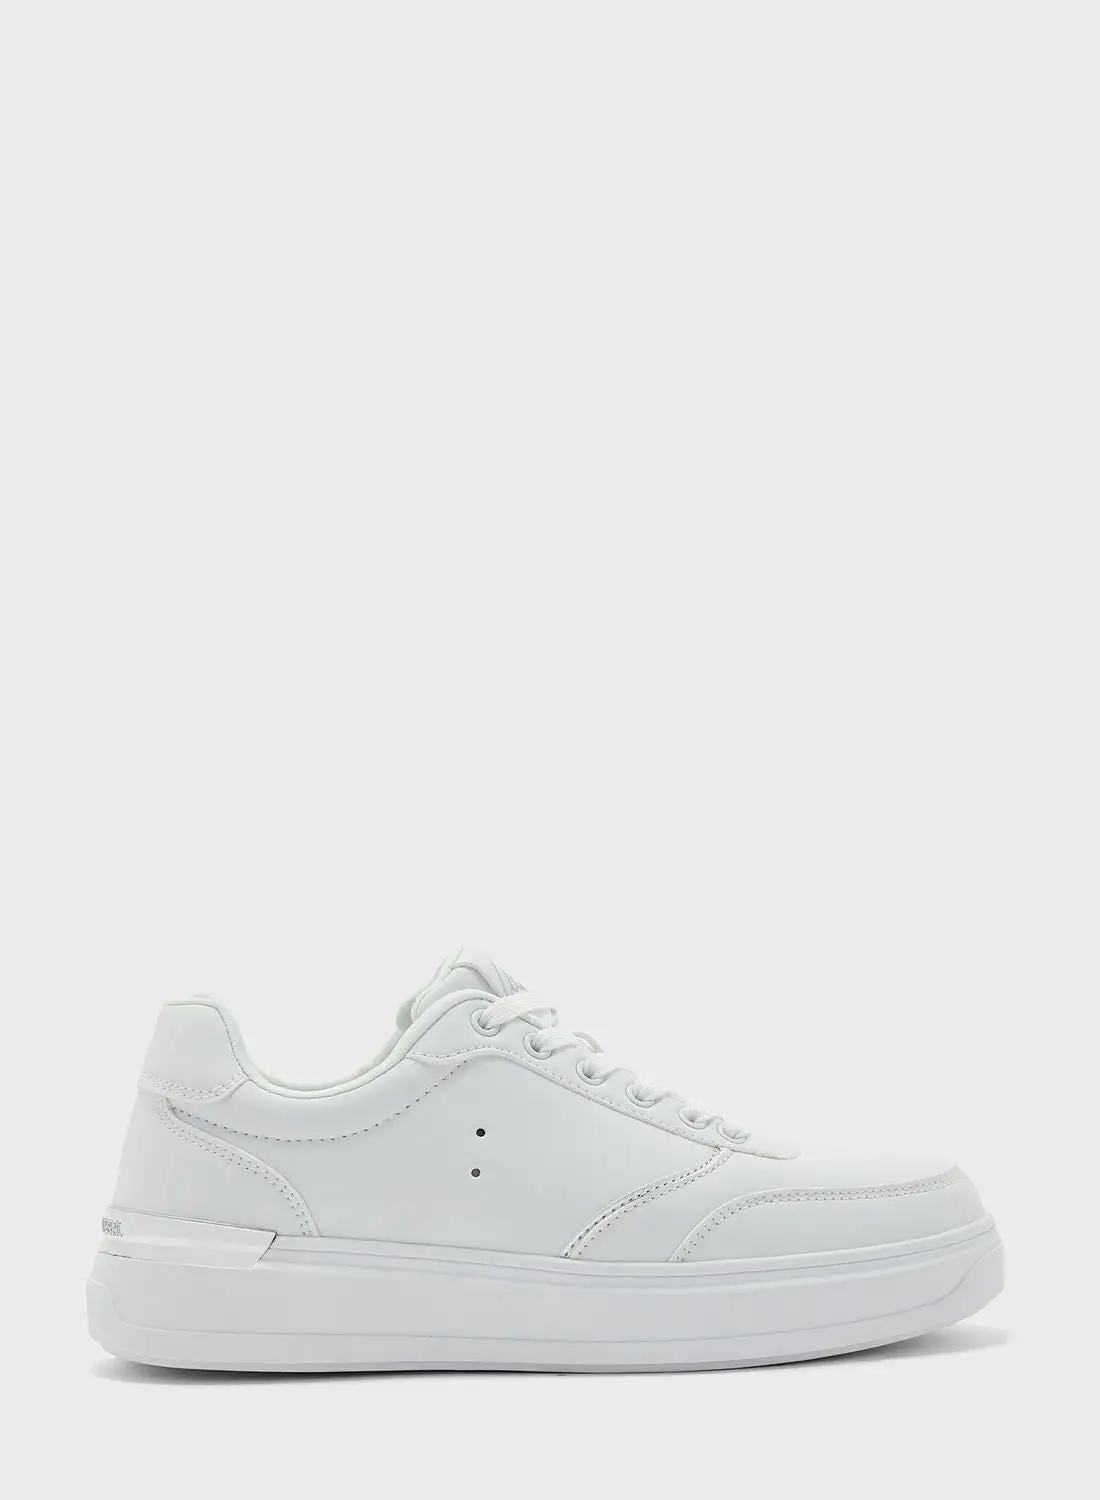 U.S.Polo Lace Up Low Top Sneakers